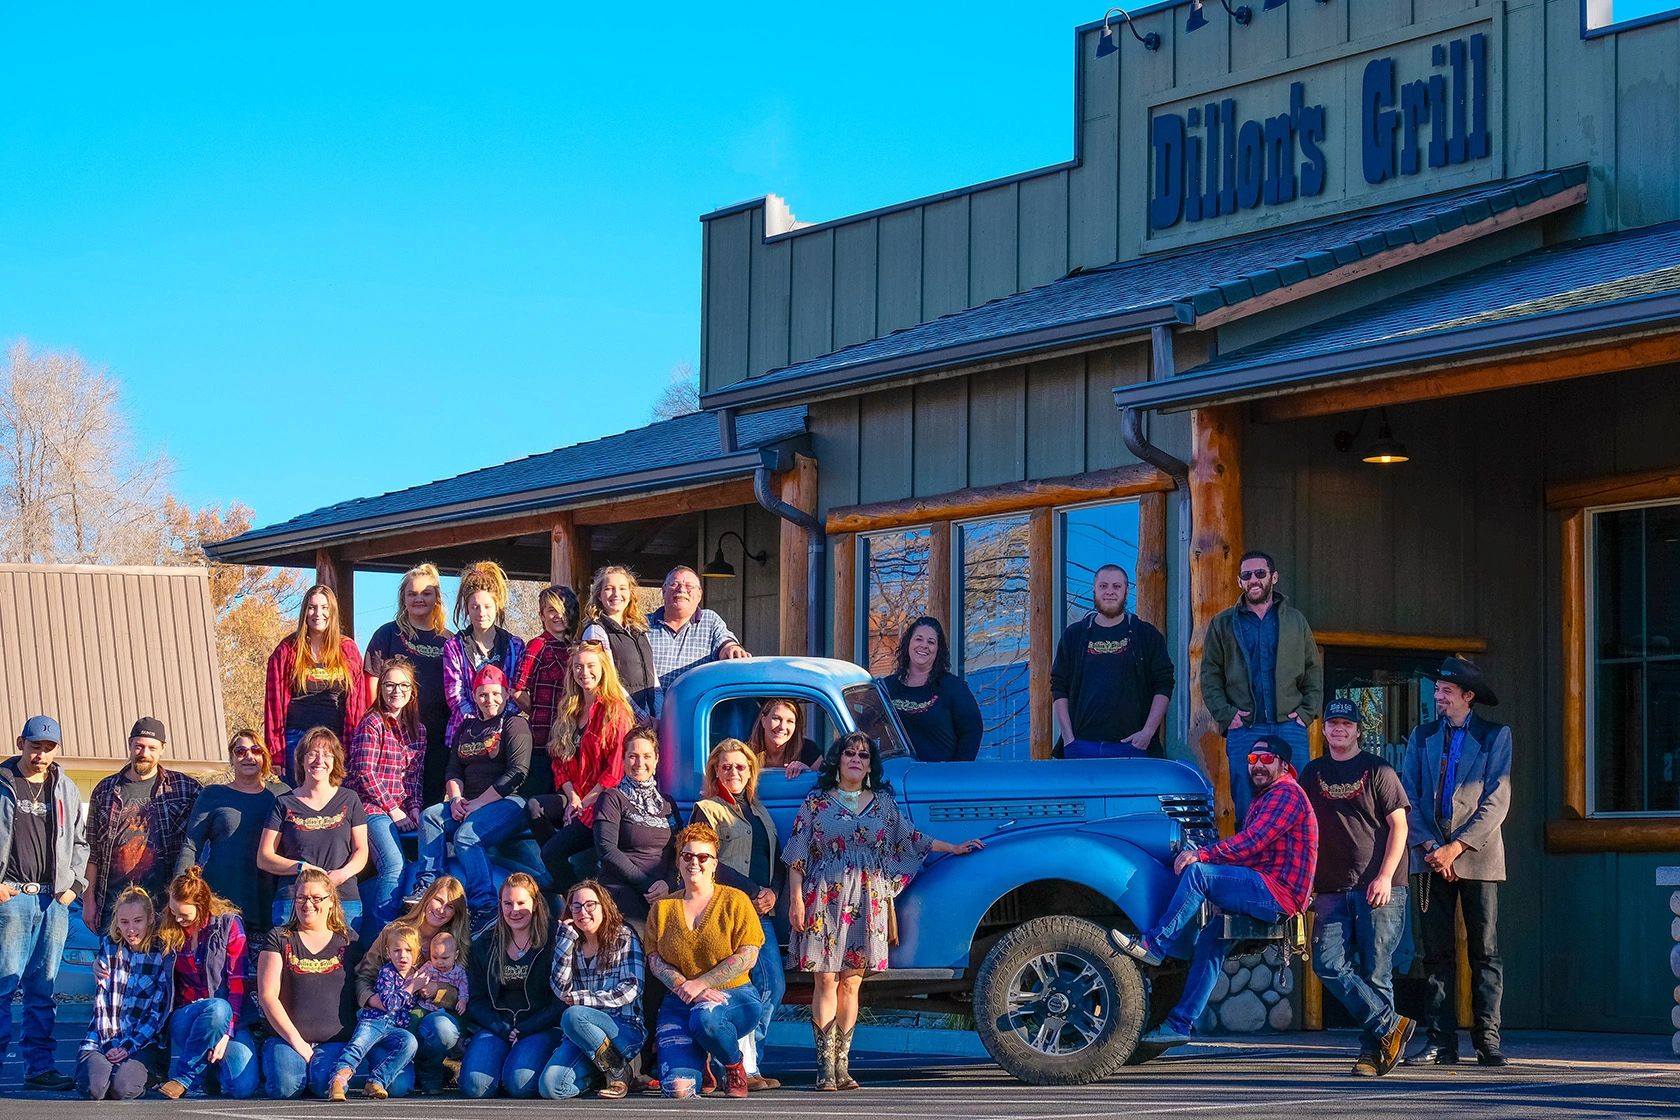 Dillon's Grill in Prineville, Oregon. Join our team of people passionate about serving others.